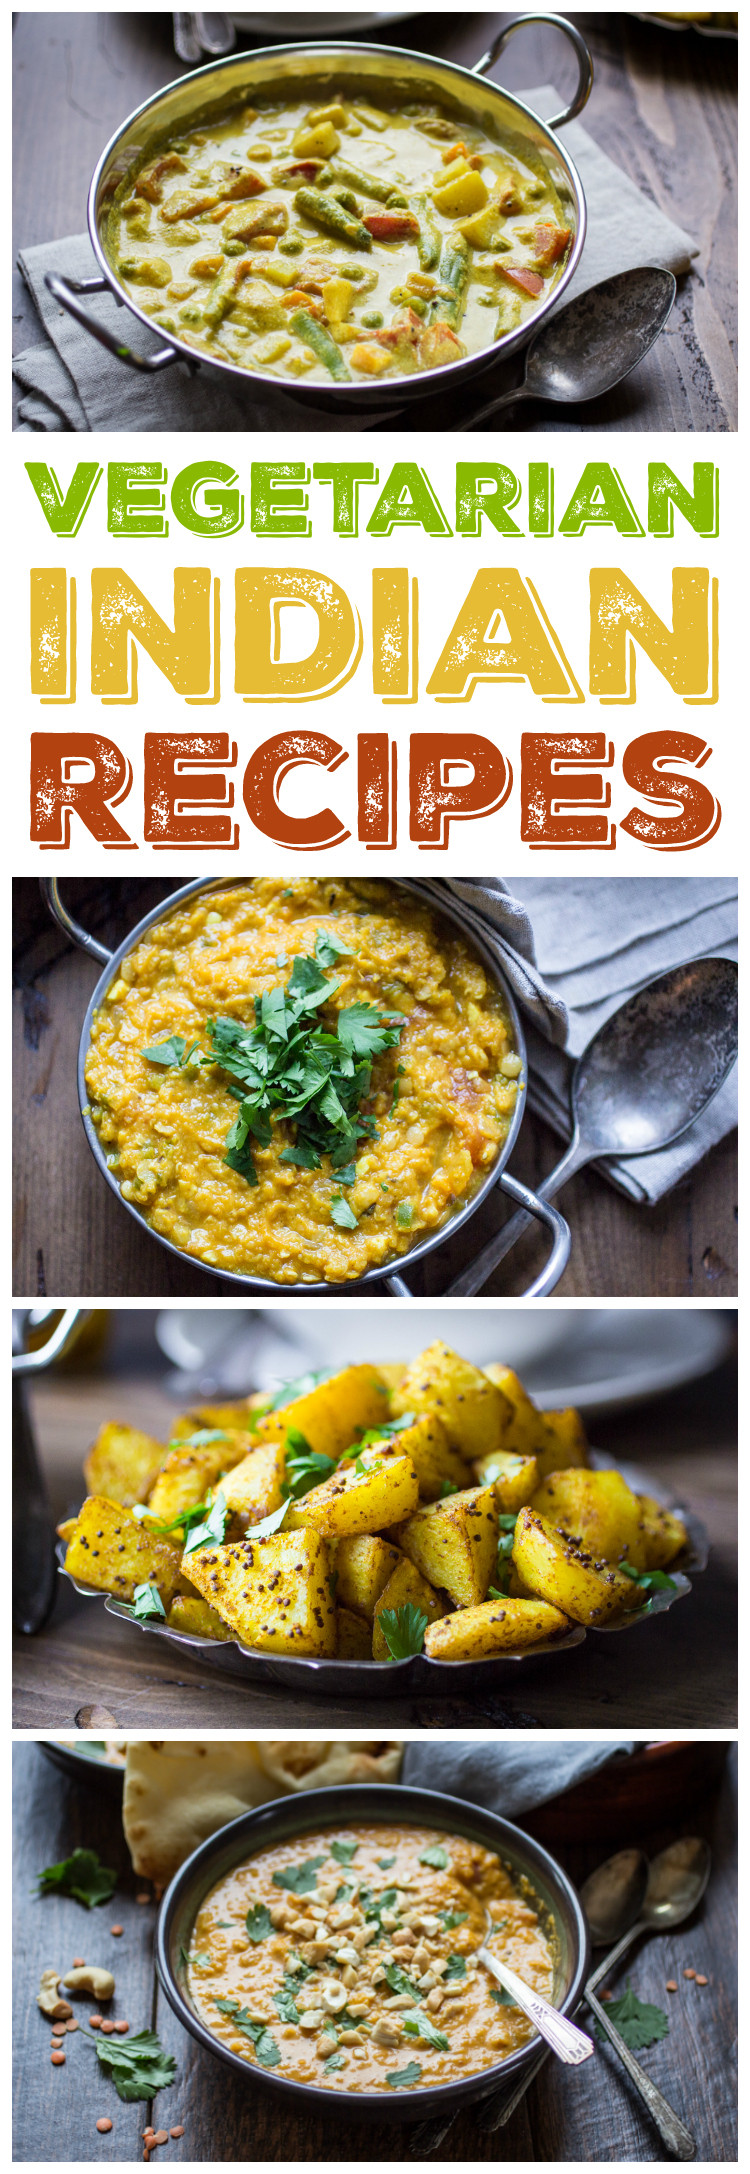 Cheap And Easy Vegetarian Recipes
 10 Ve arian Indian Recipes to Make Again and Again The